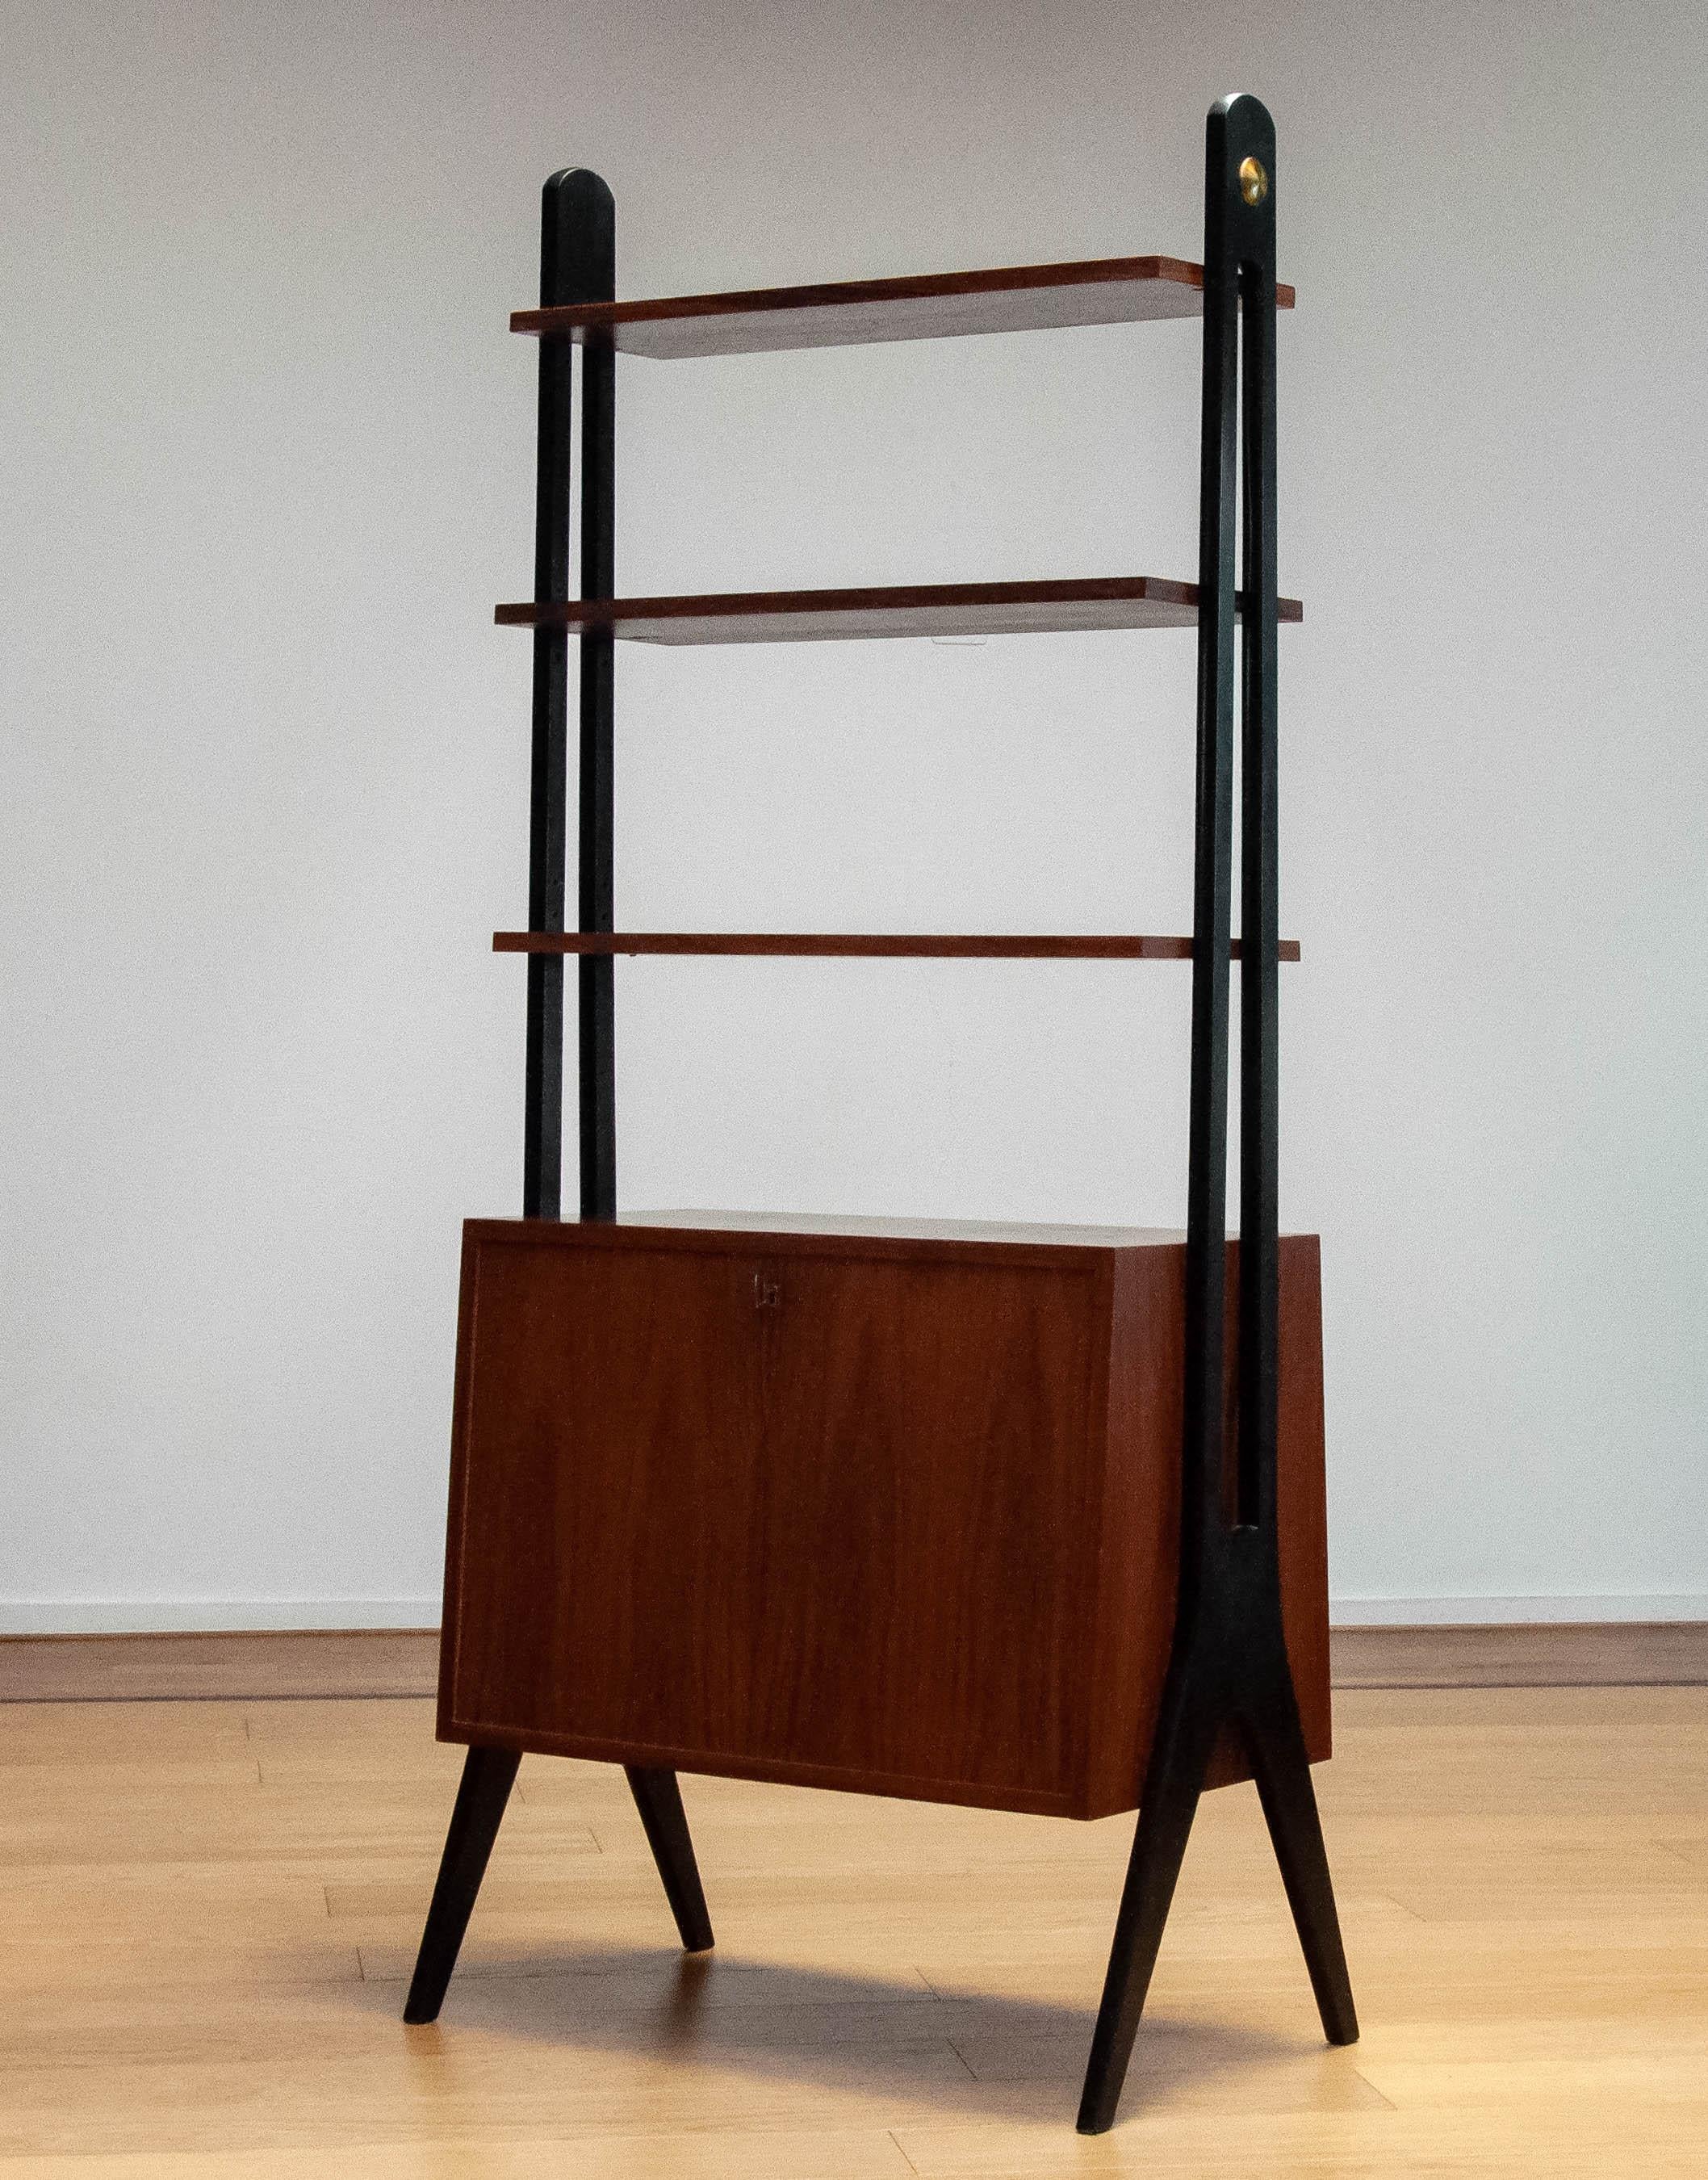 Scandinavian Modern 1950 Rosewood Bookcase Room Divider With Black Lacquered Stands By Treman Sweden